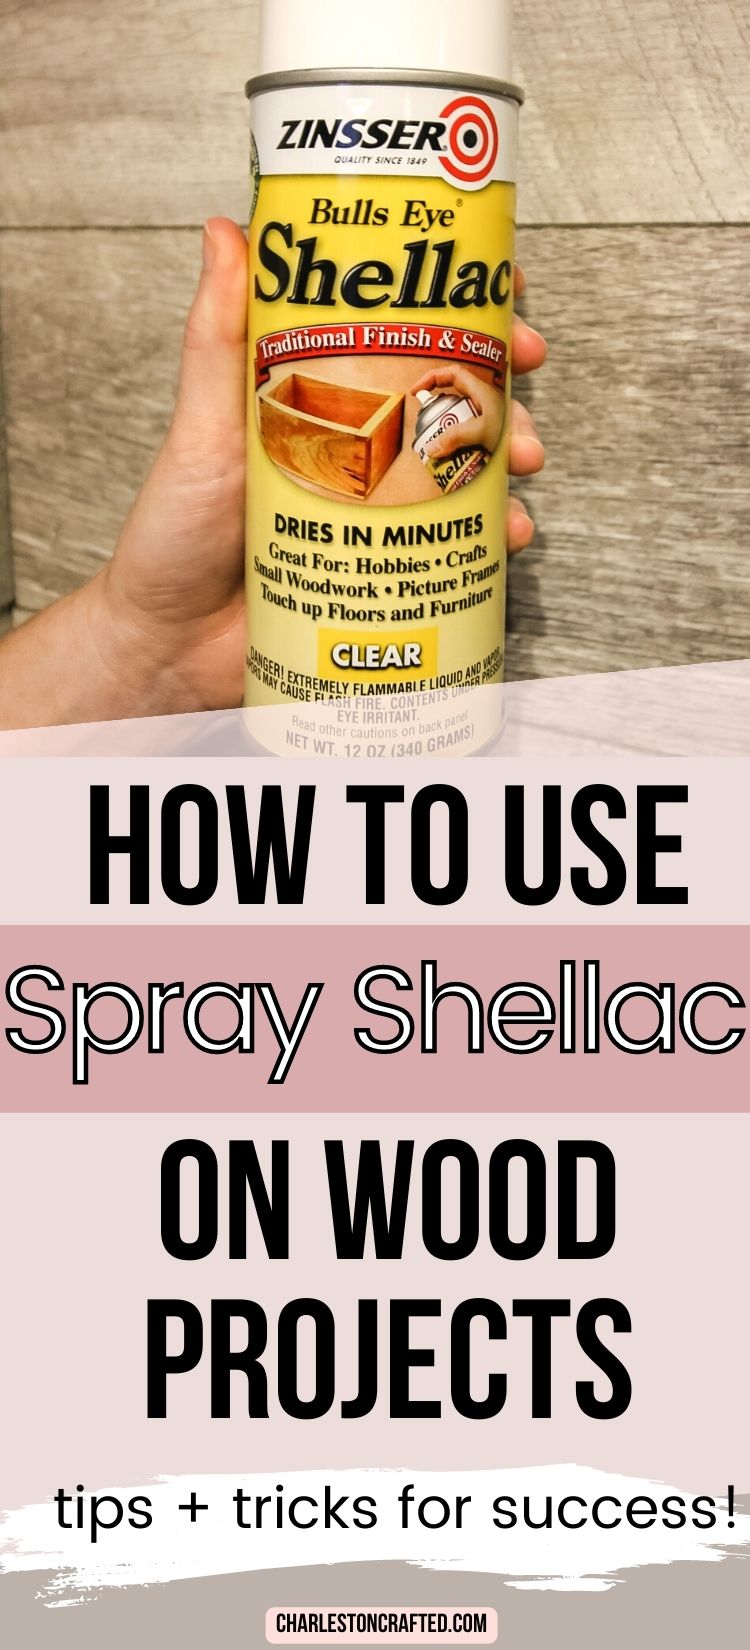 How to use Zinsser spray shellac